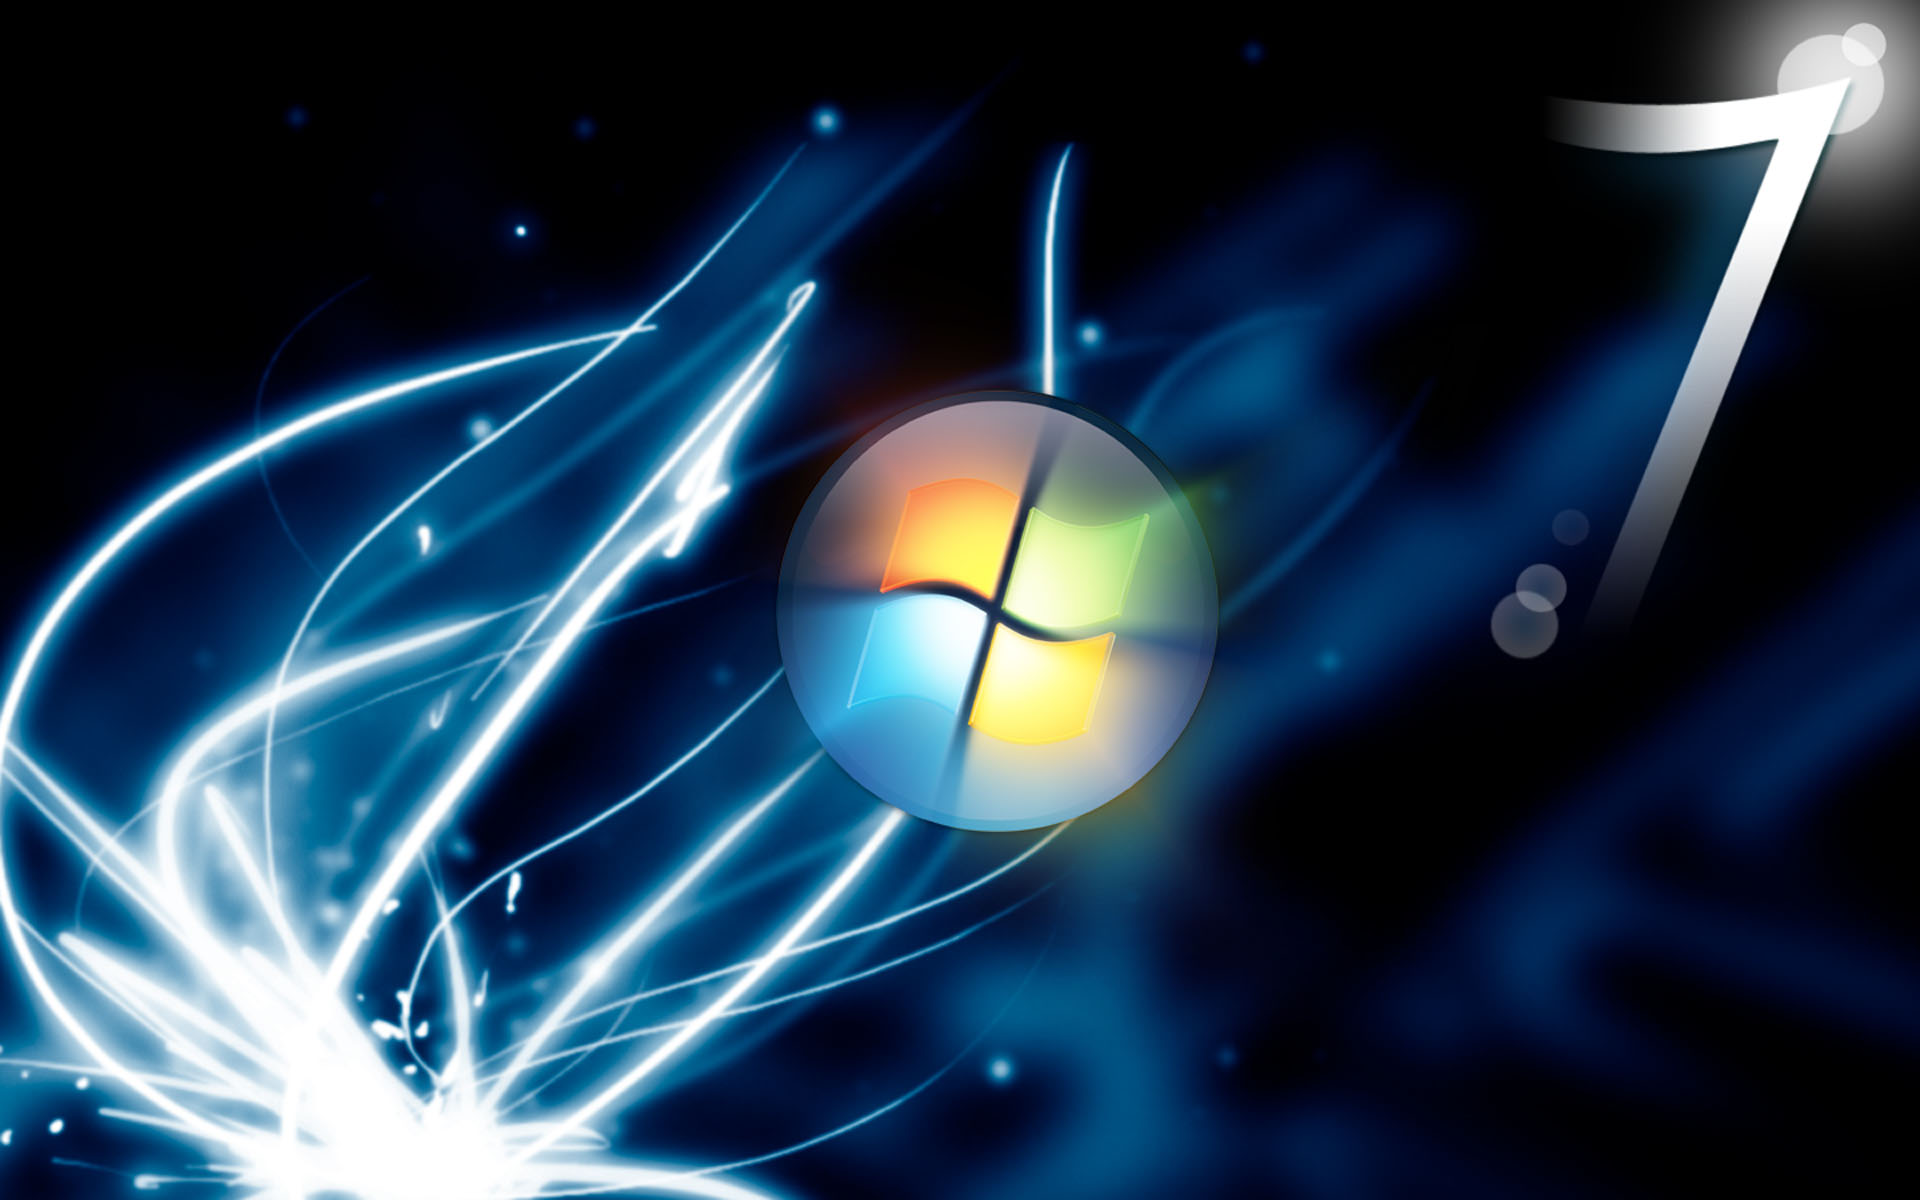 ALL ABOUT WINDOWS 7